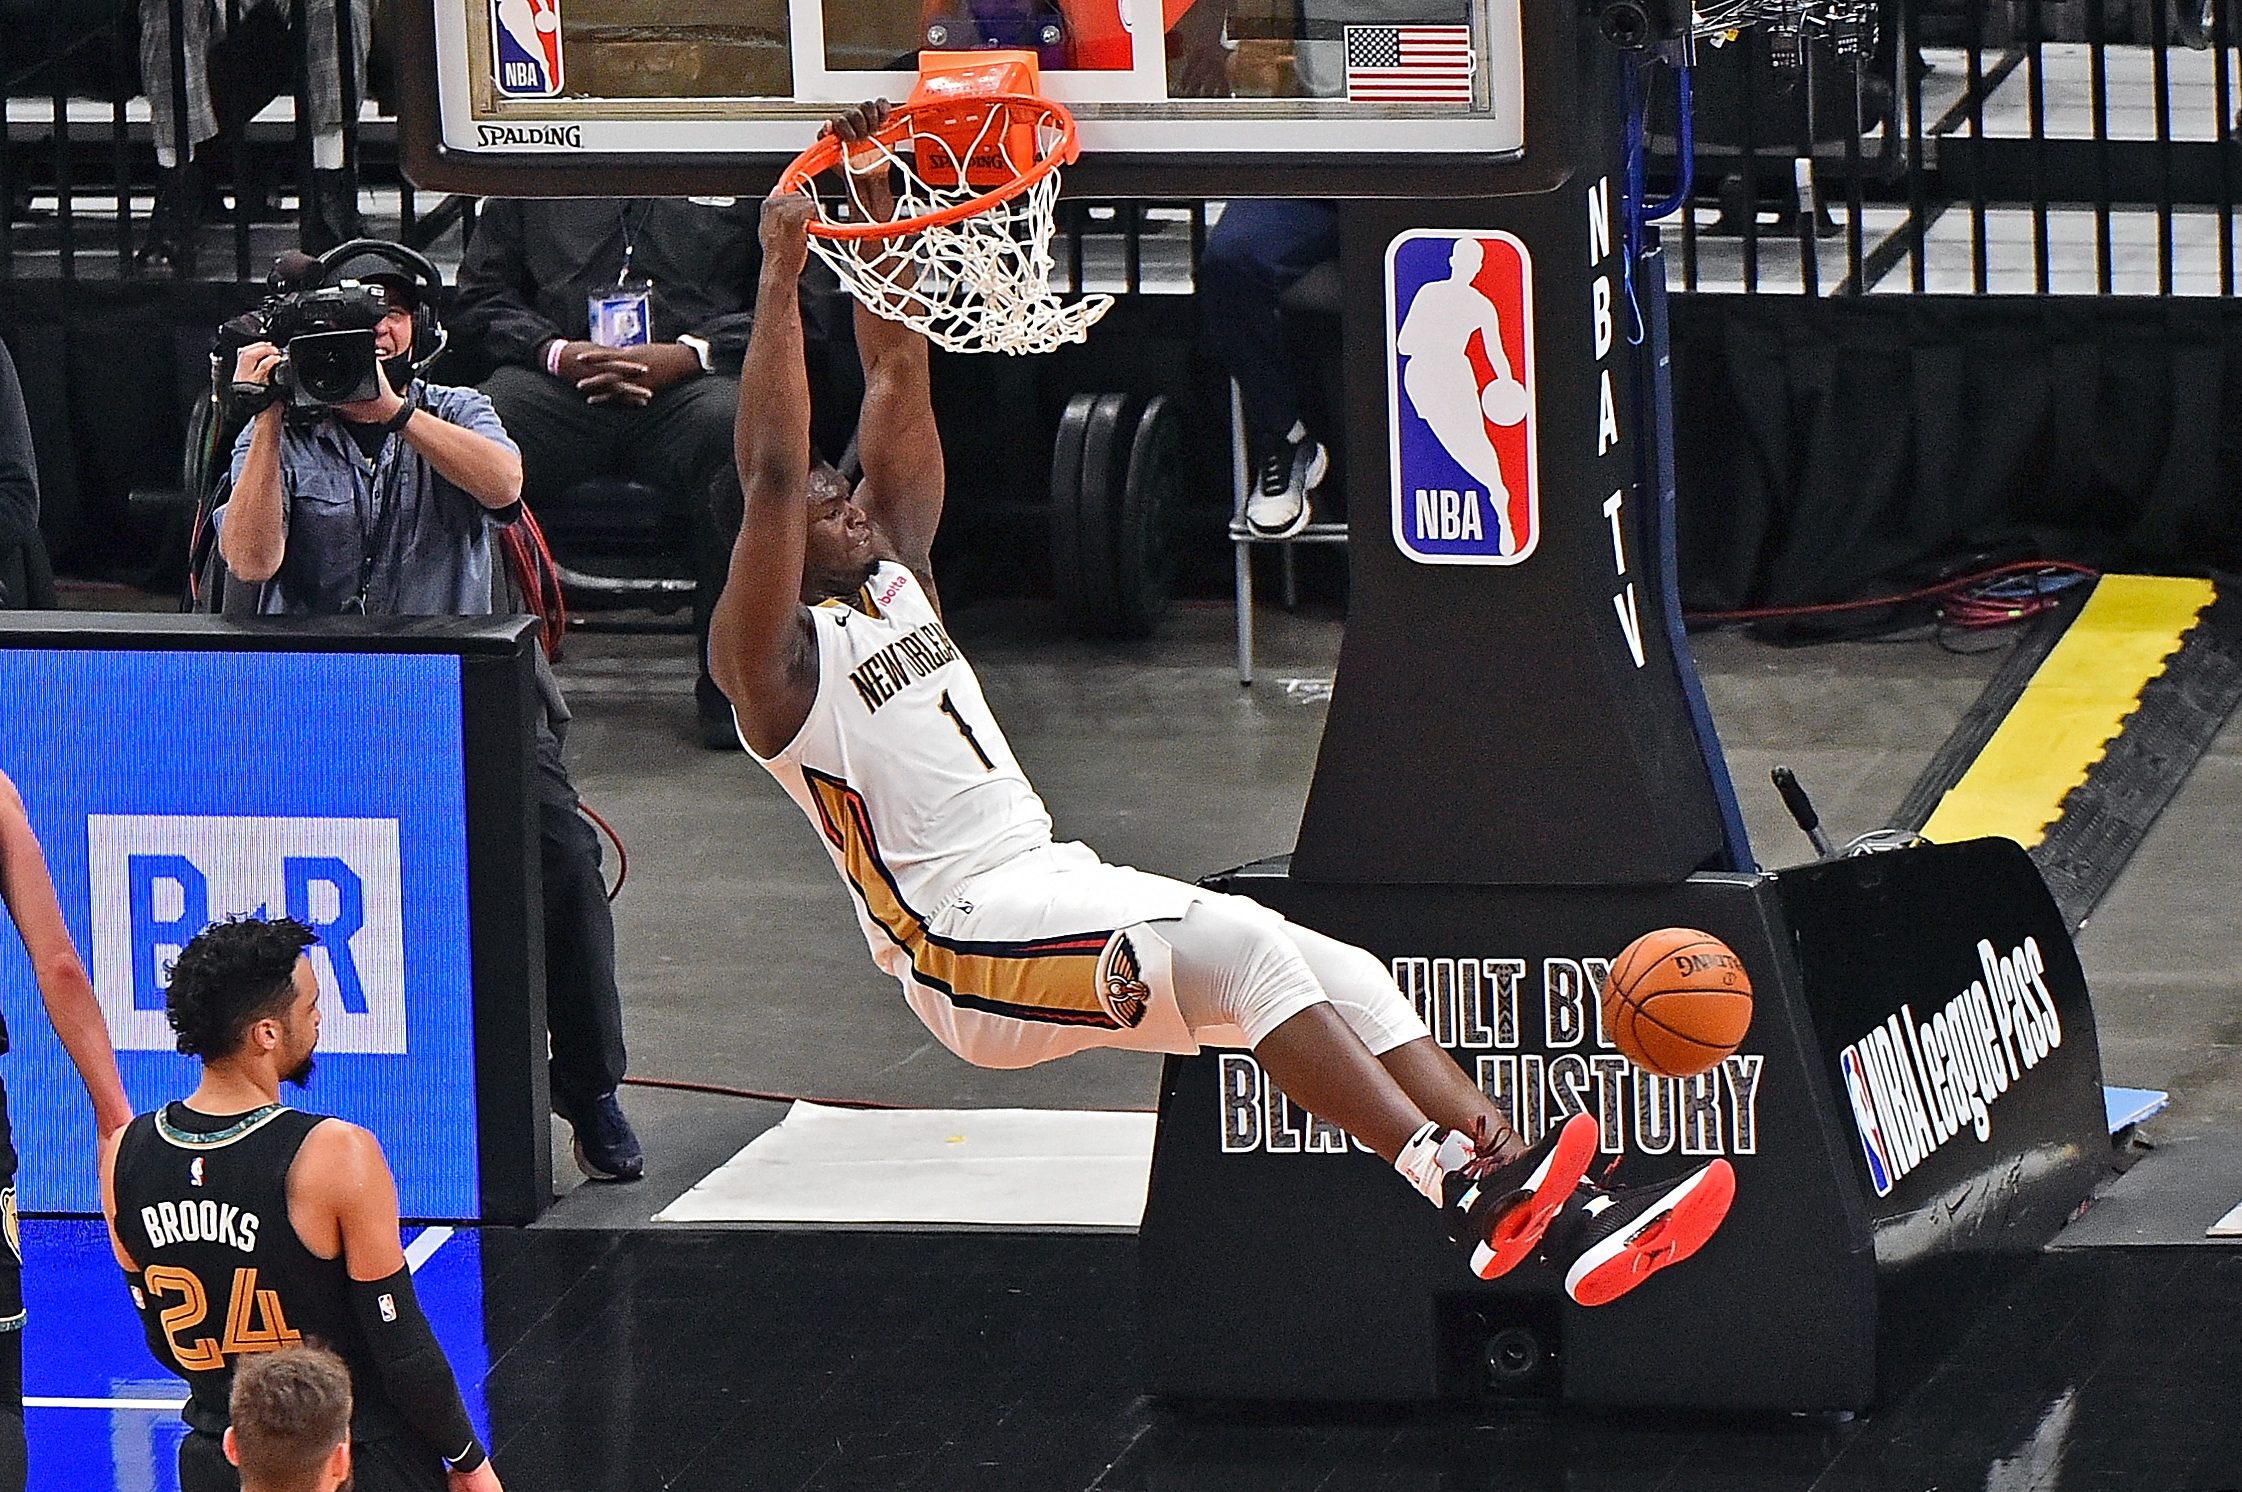 NBA Top Shot Sells Millions Worth of Virtual Highlights Every Day